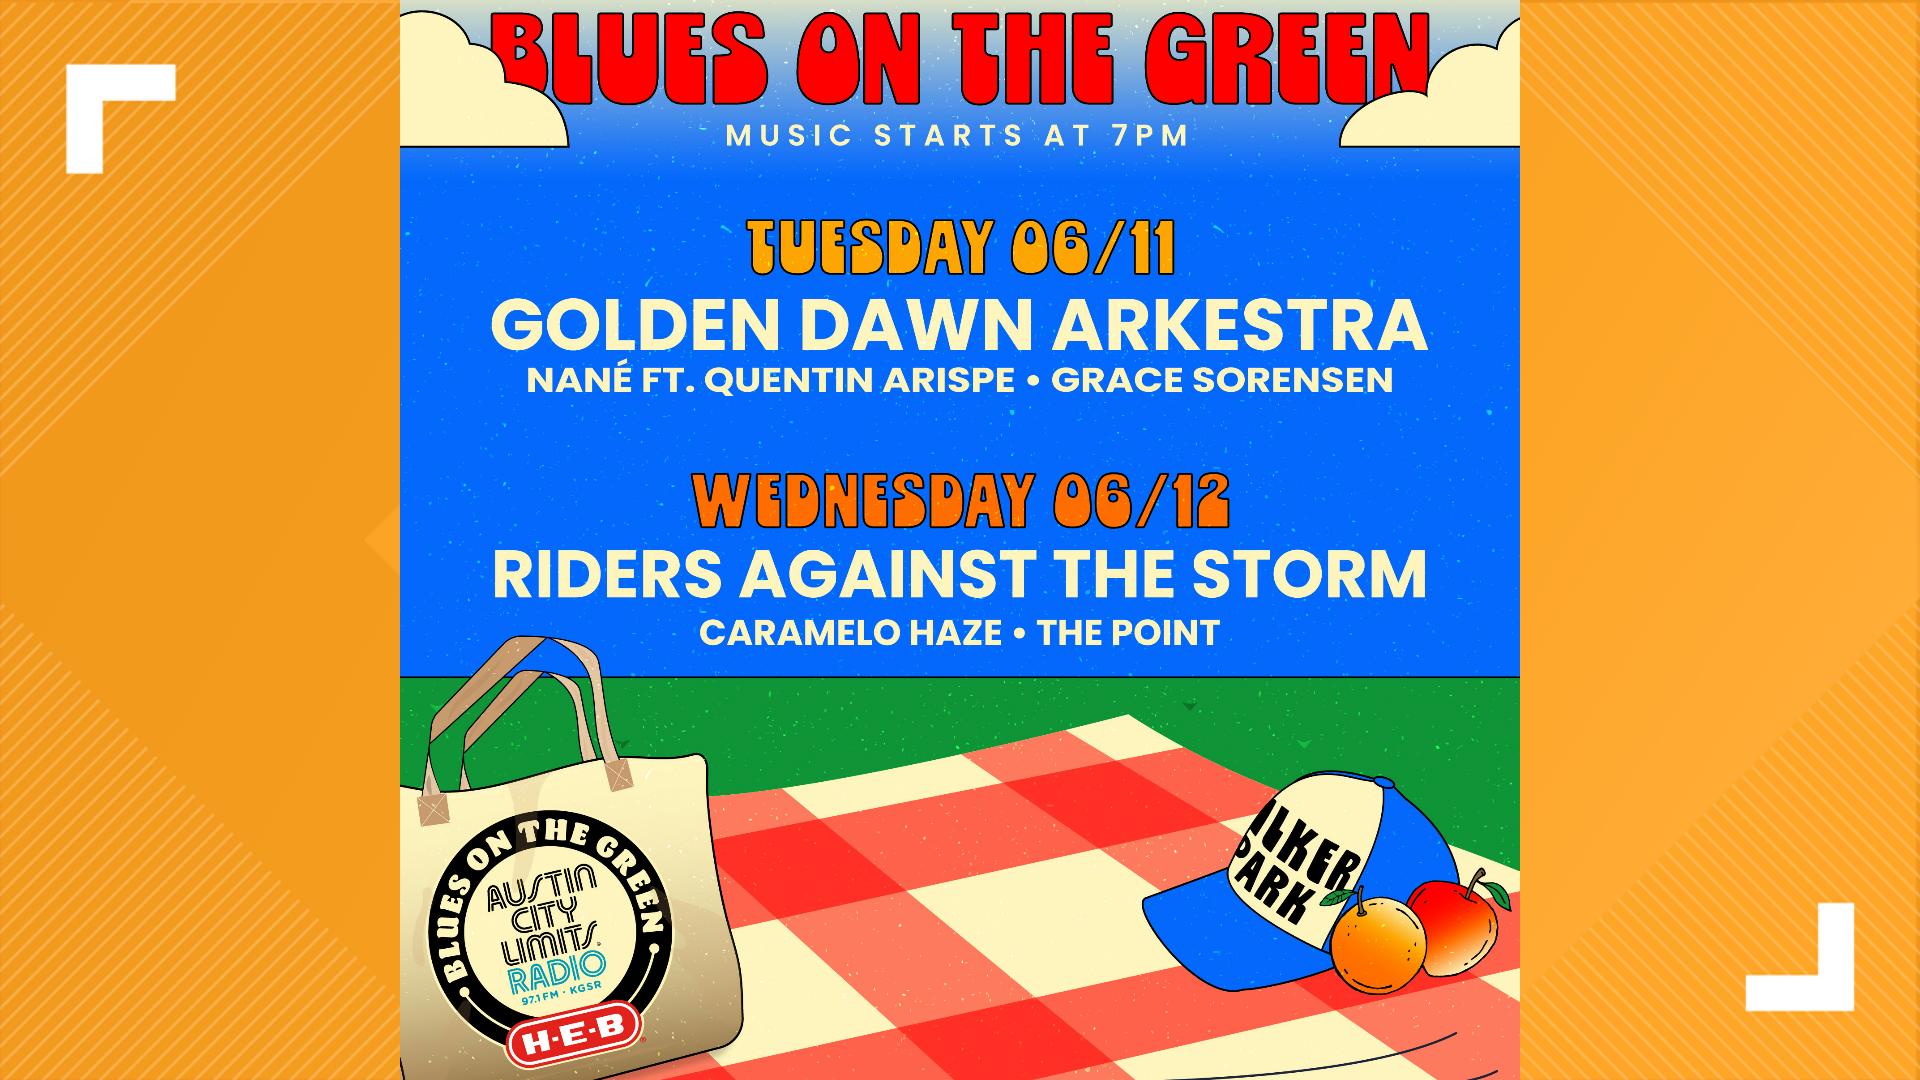 Blues on the Green returns to Zilker Park this week. Here's what you need to know before you go.